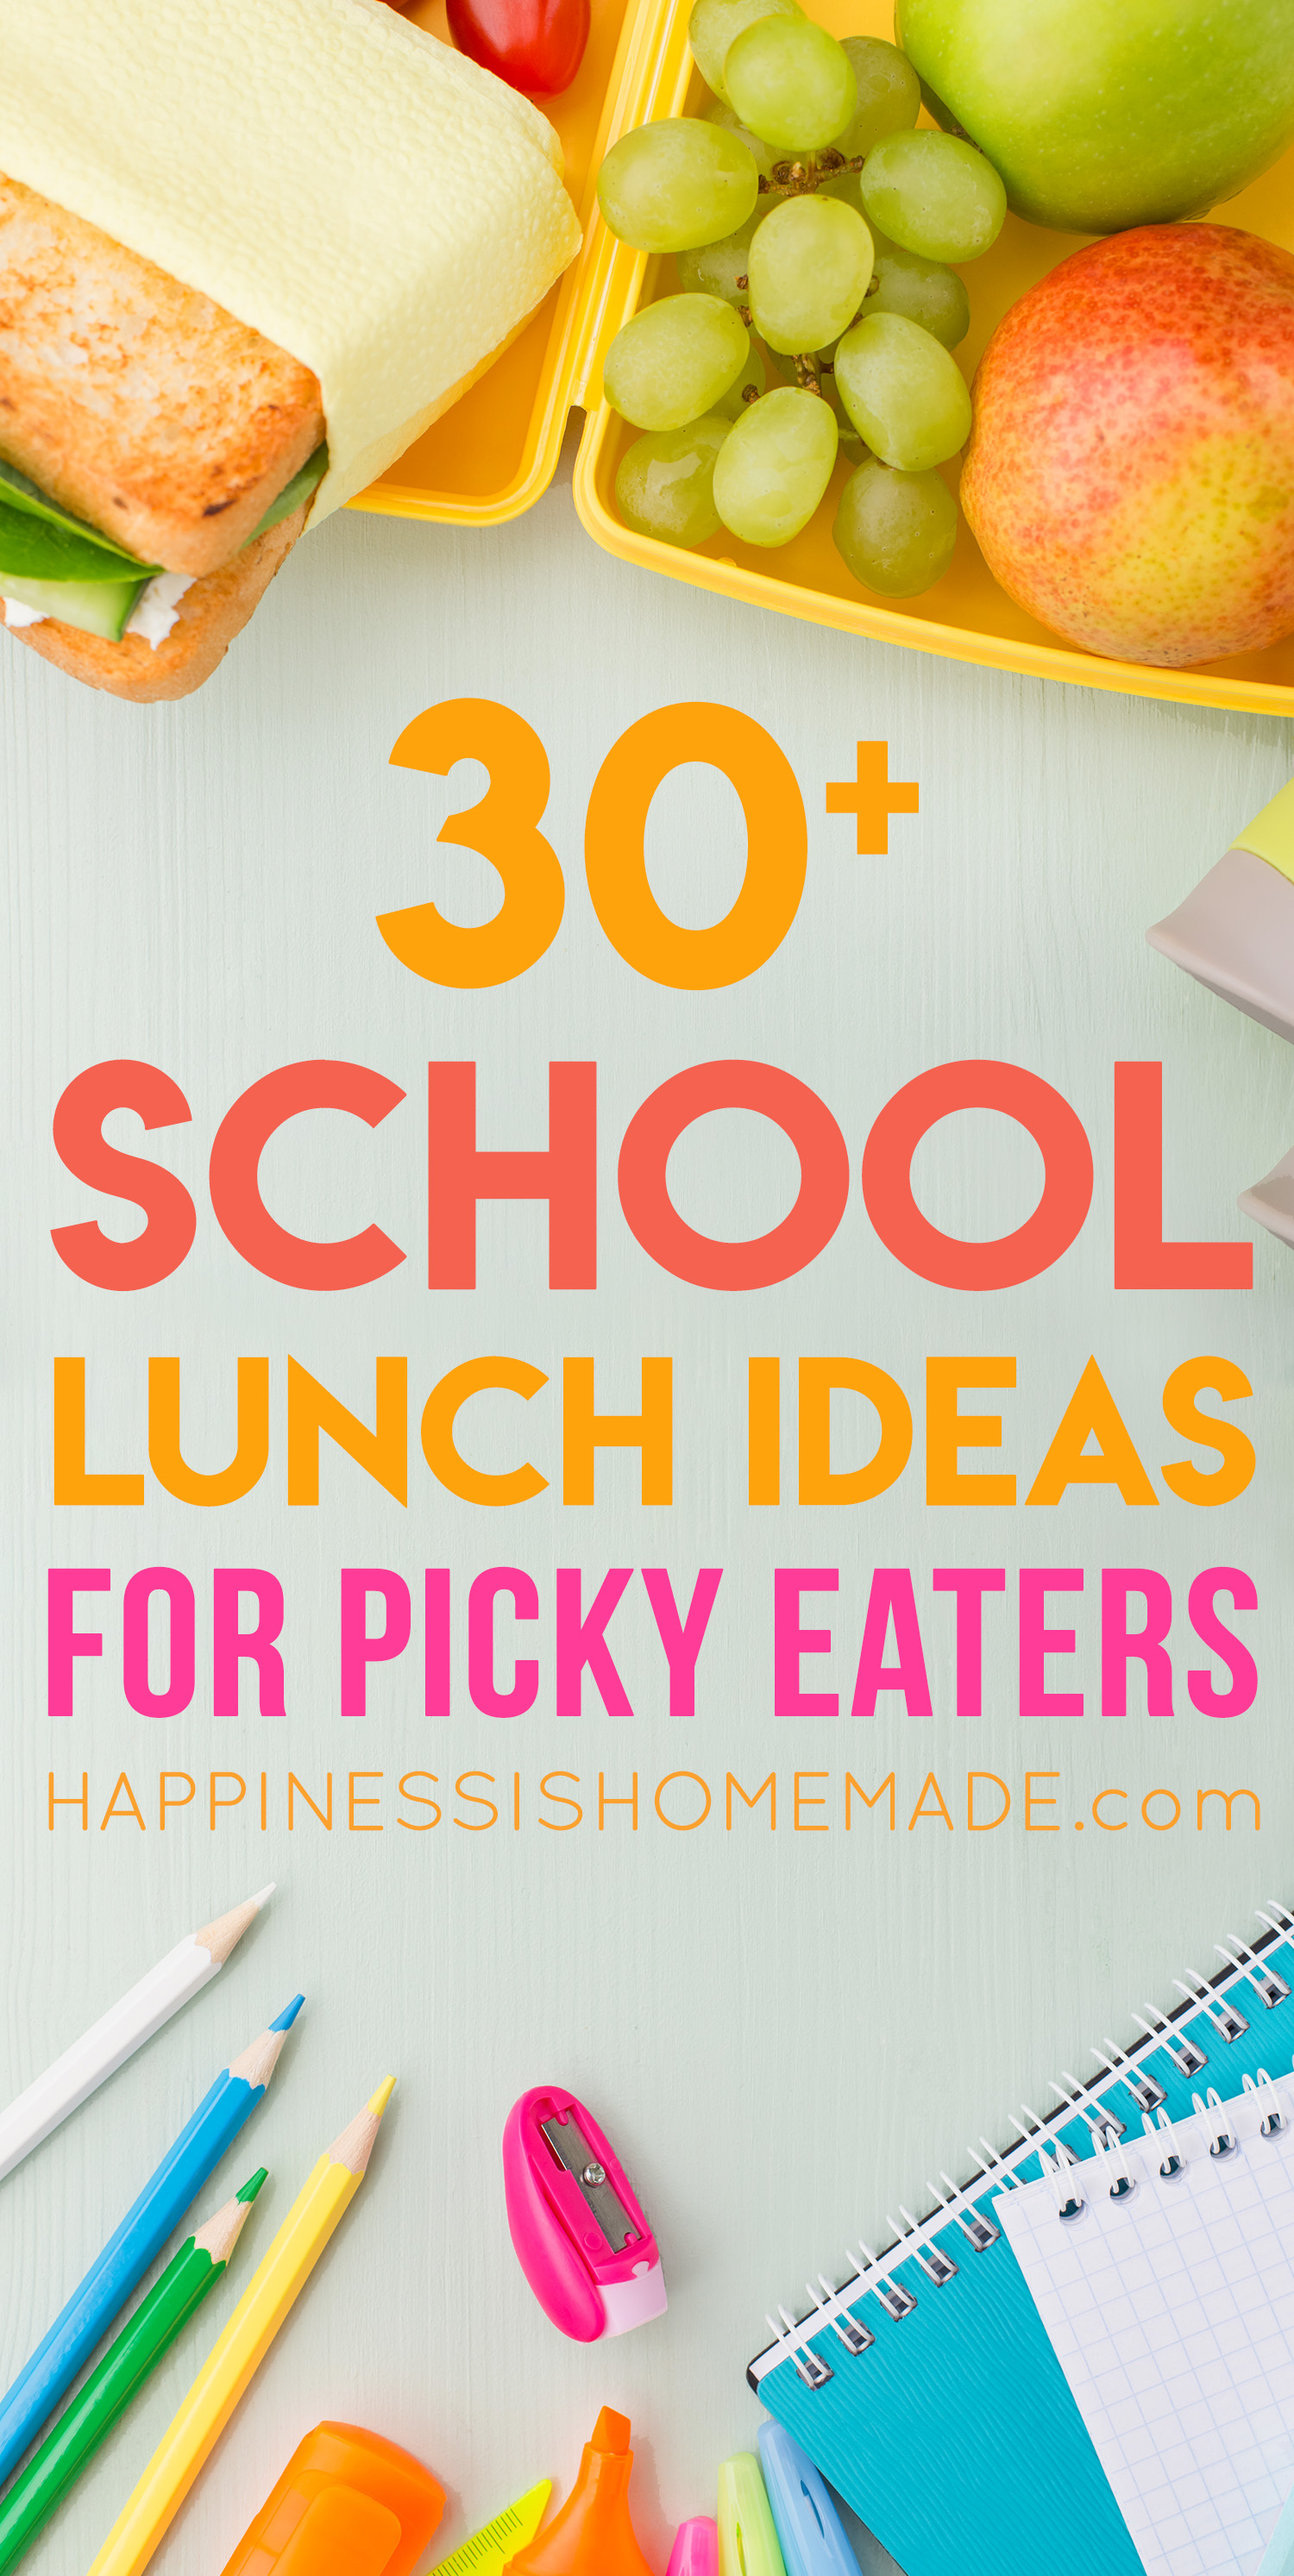 https://www.happinessishomemade.net/wp-content/uploads/2018/06/30-School-Lunch-Ideas-for-Picky-Eaters.jpg